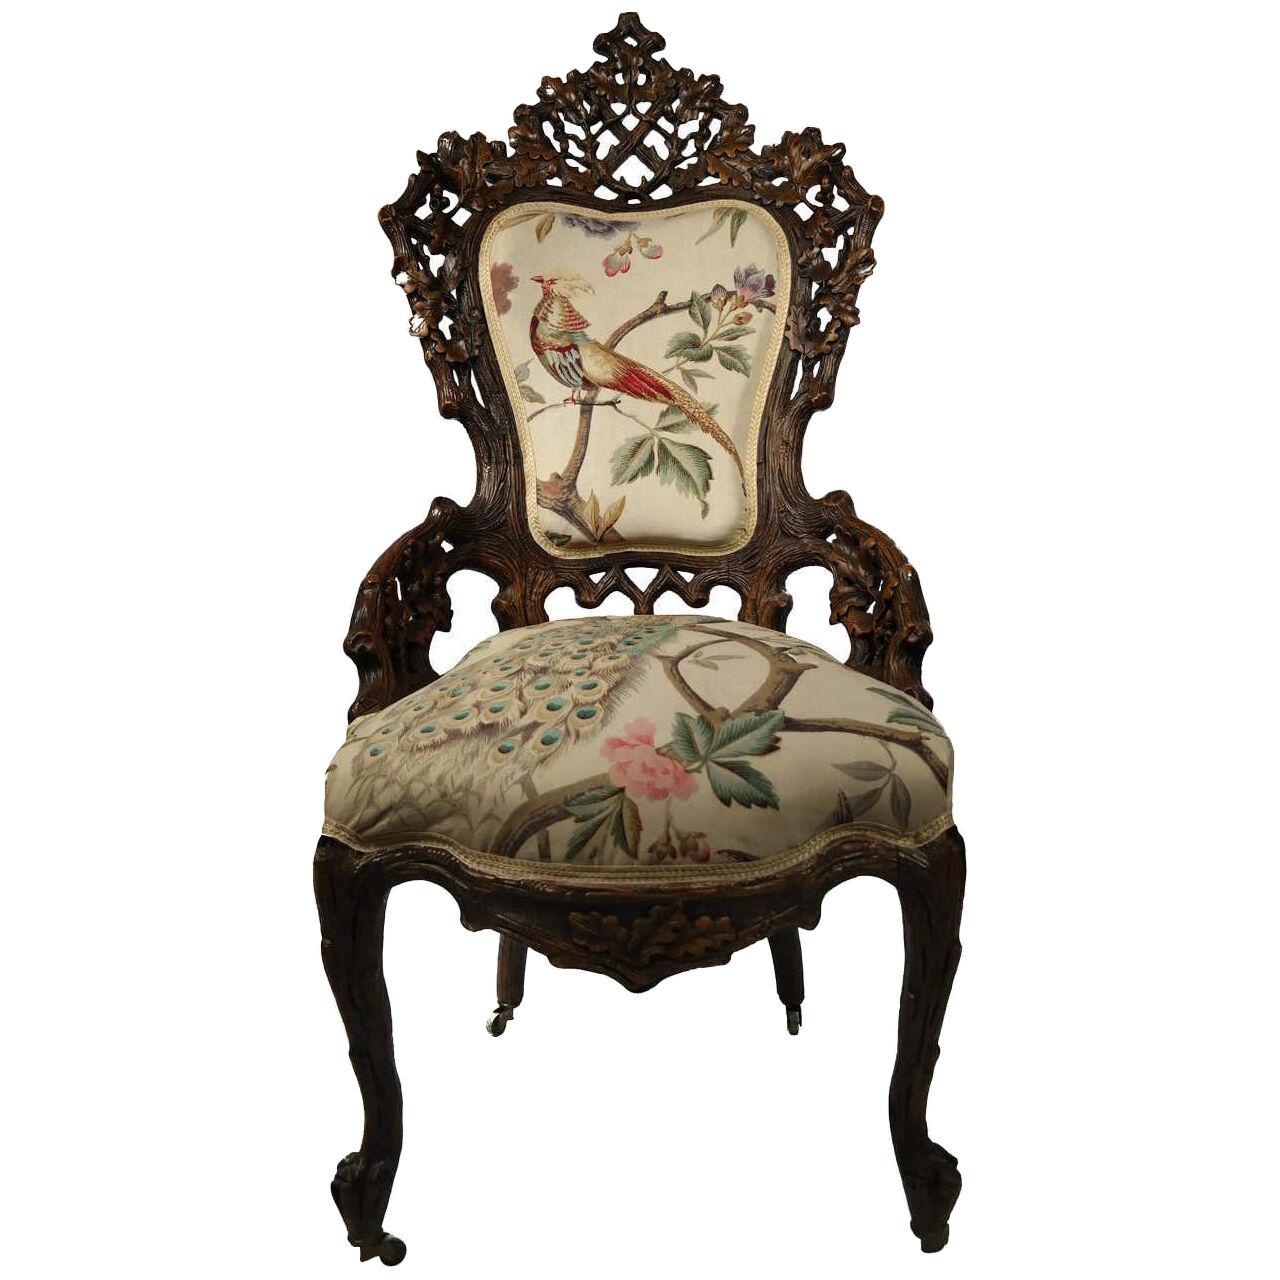 Late 19th Century Black Forest Carved Oak Chair, Swiss circa 1880.